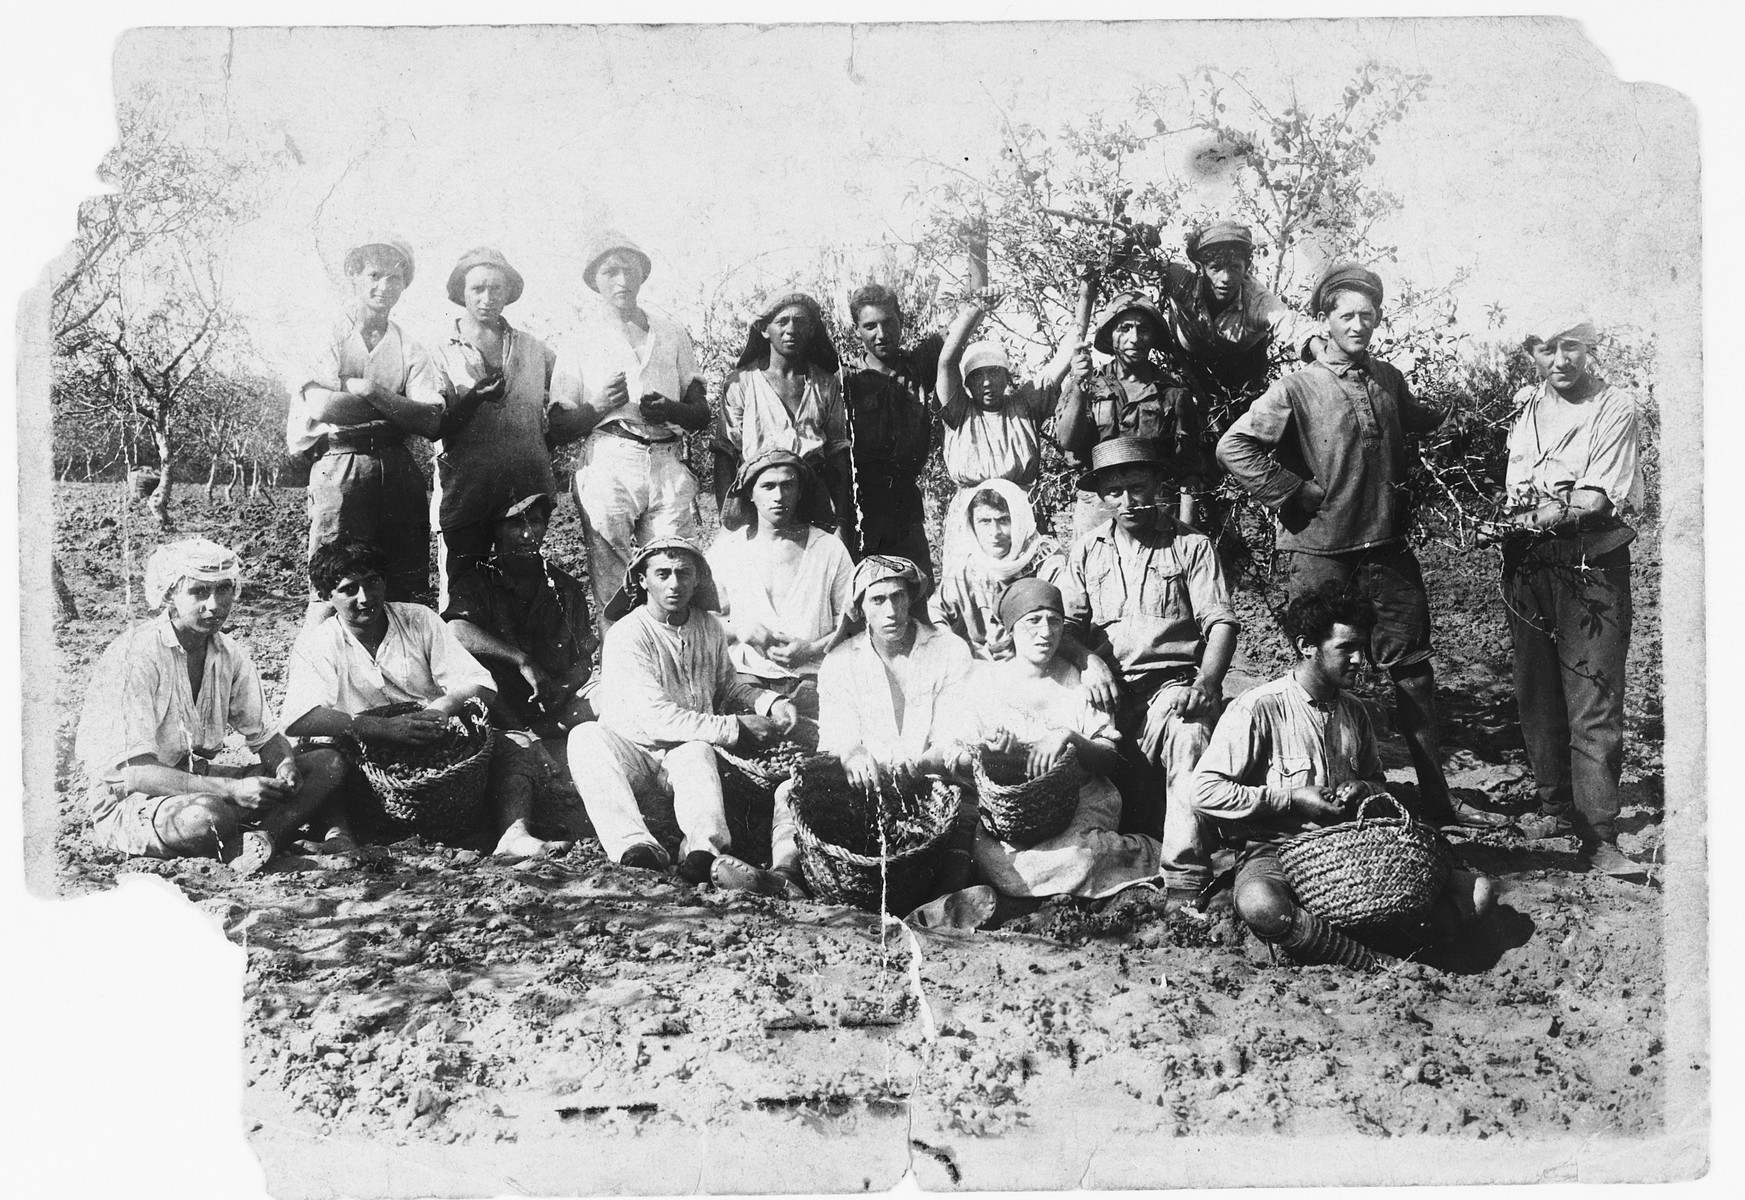 Group portrait of young Zionist pioneers in Palestine in a field with straw baskets.

Among those pictured is Mendel Abramowicz.